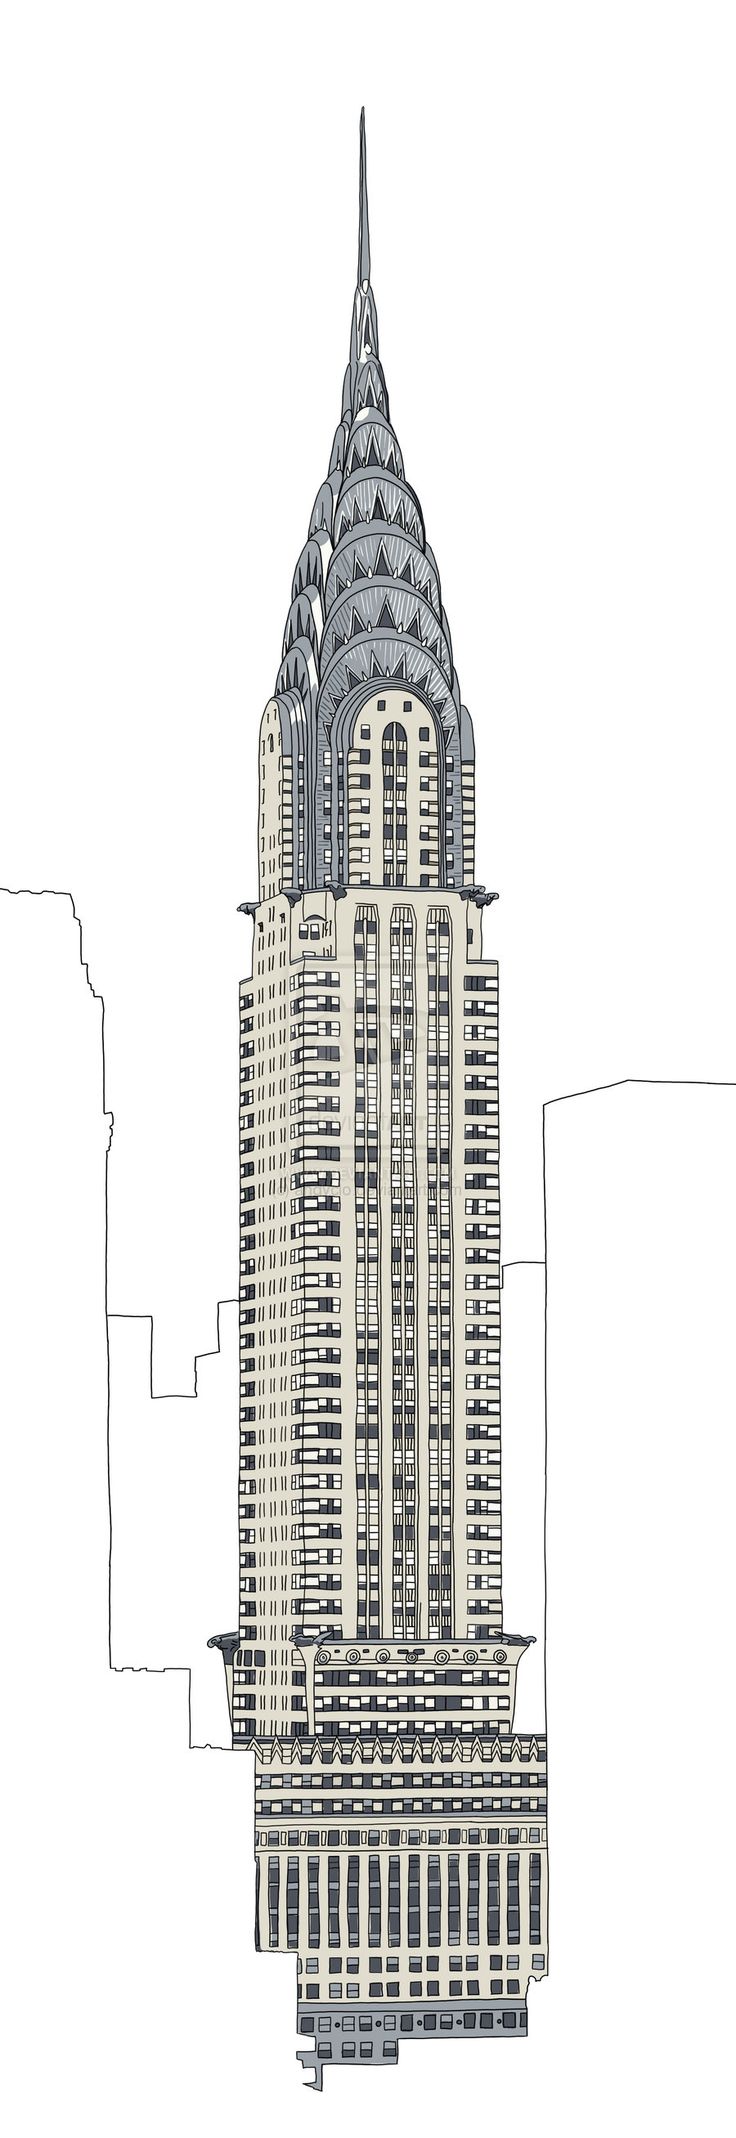 Building Image Drawing